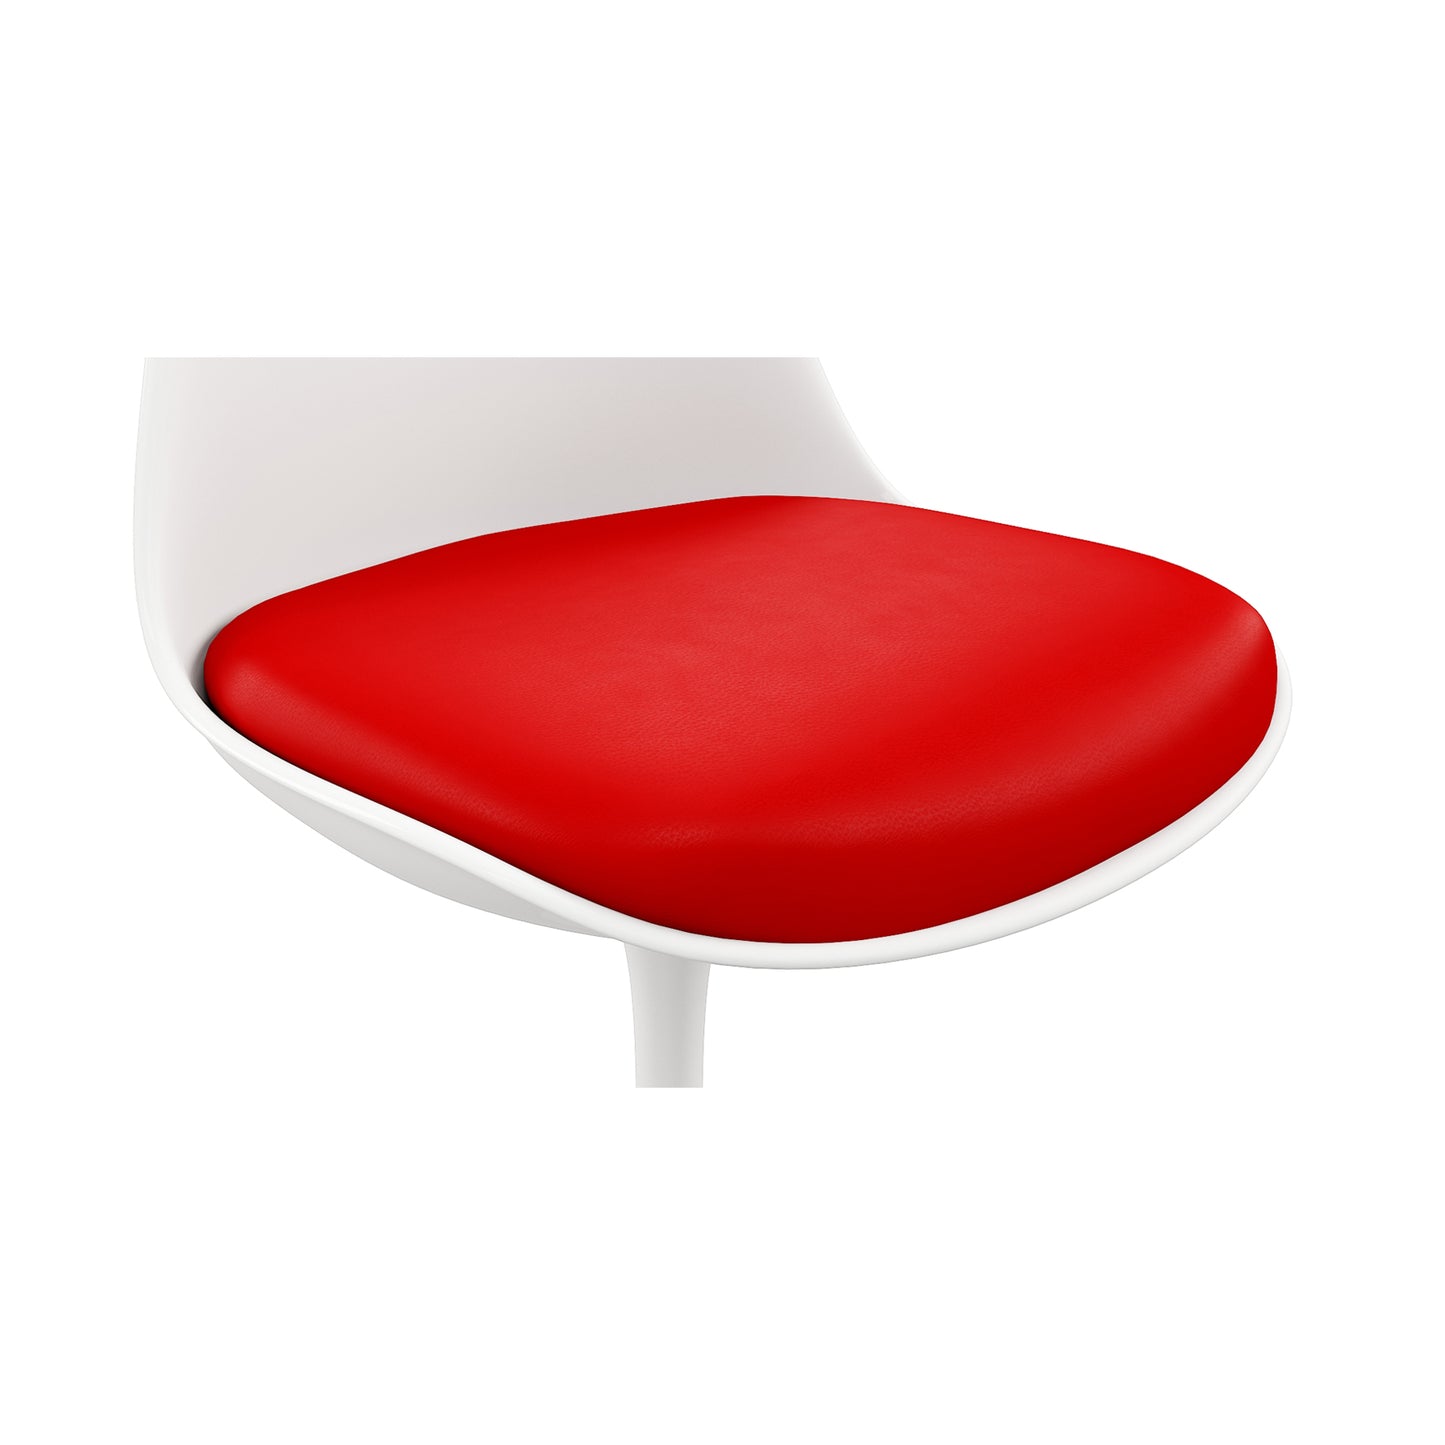 Rose Dining Chair, Red